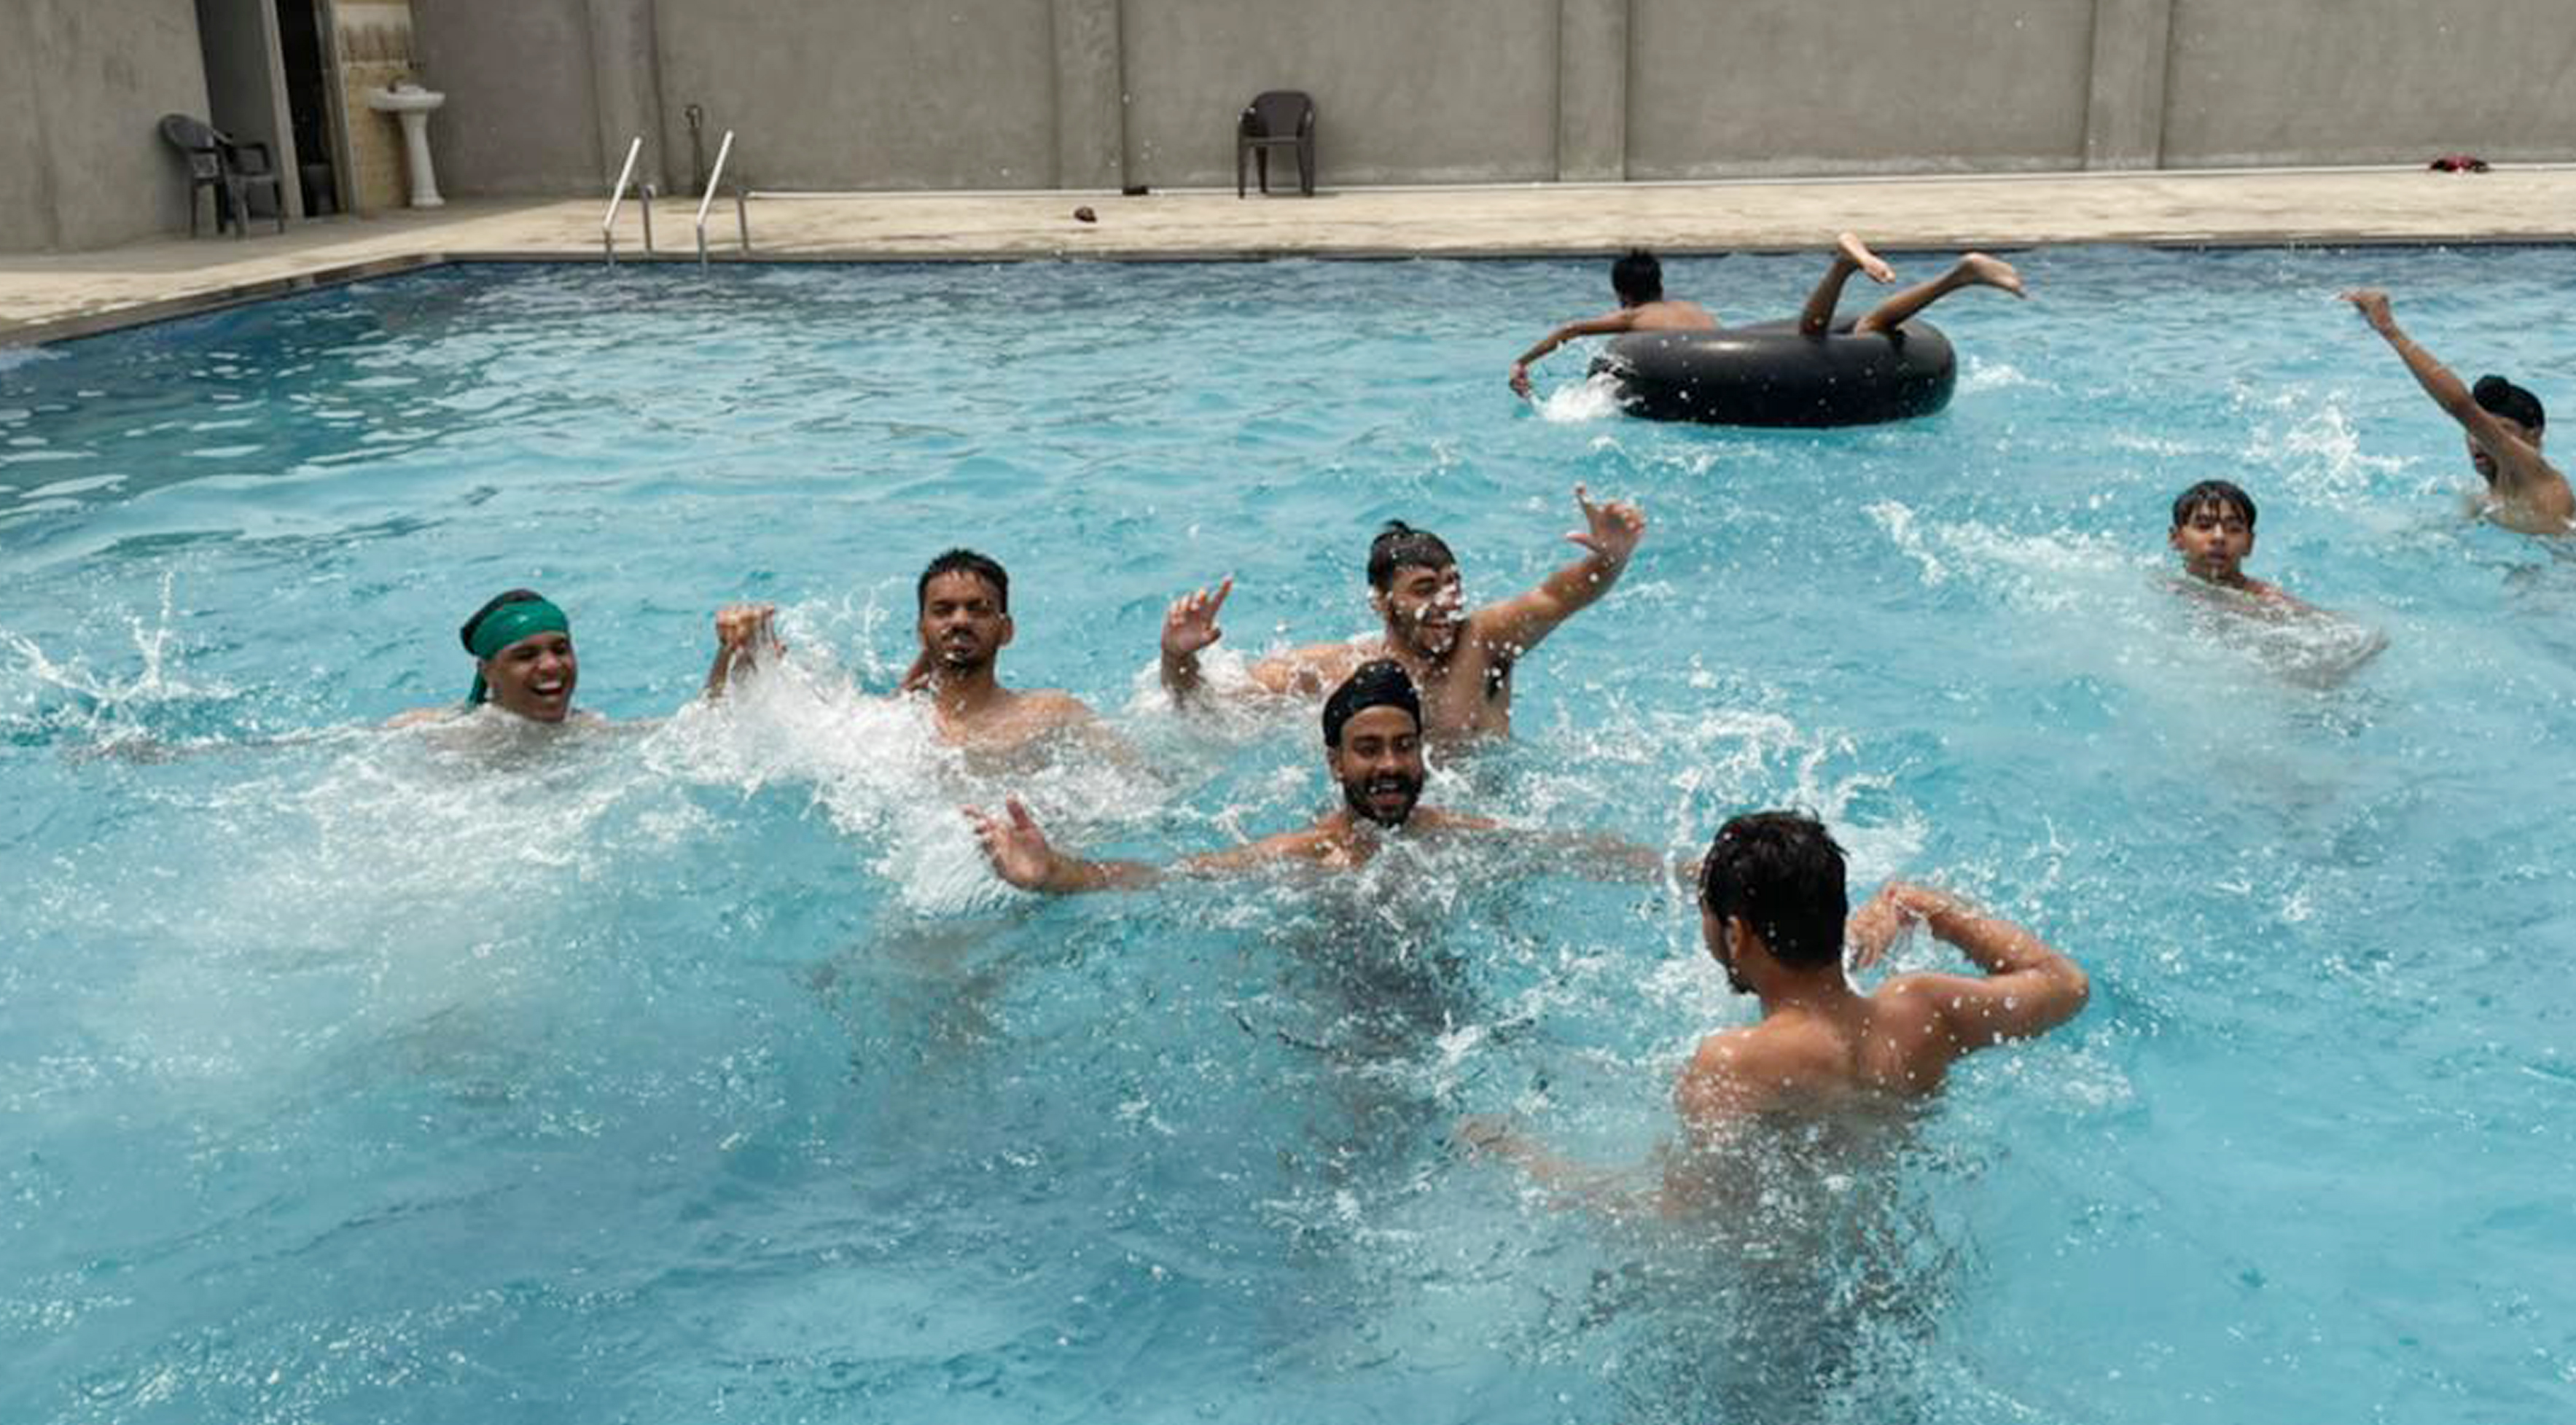 Private swimming pools give Amritsar residents a big respite from sweltering heat